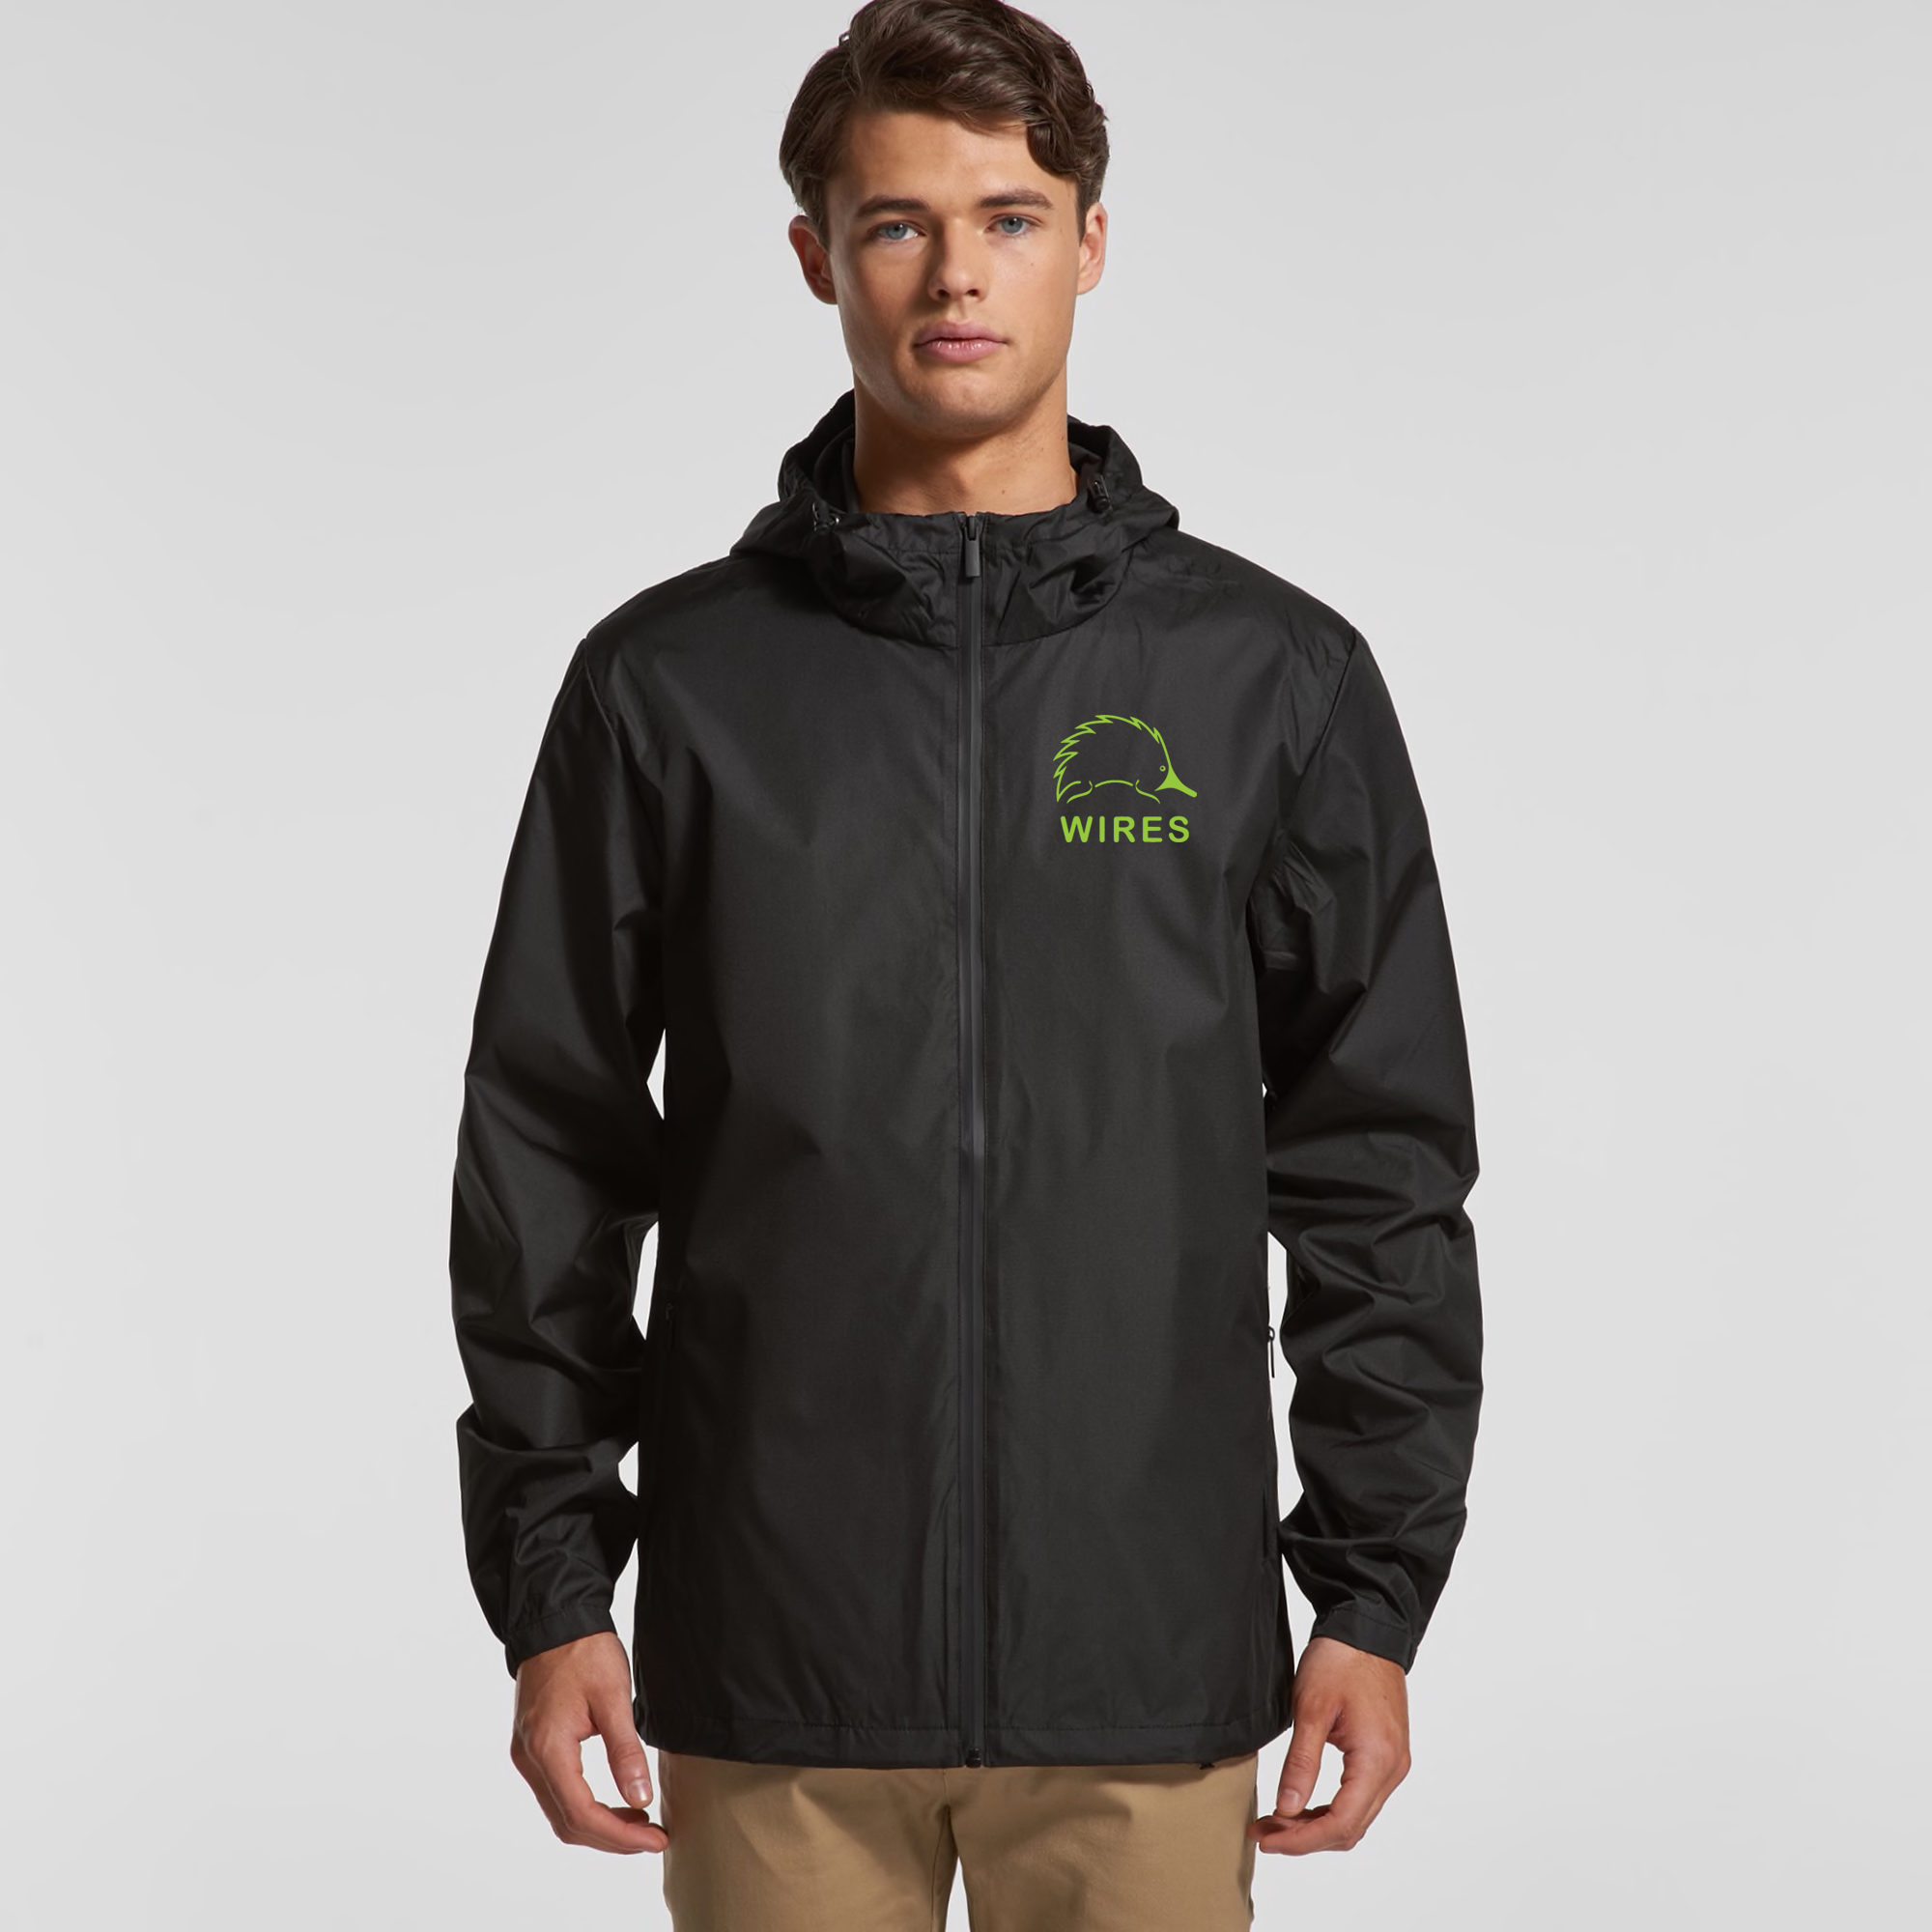 Zip up hooded water resistent jacket Black with green print front and back